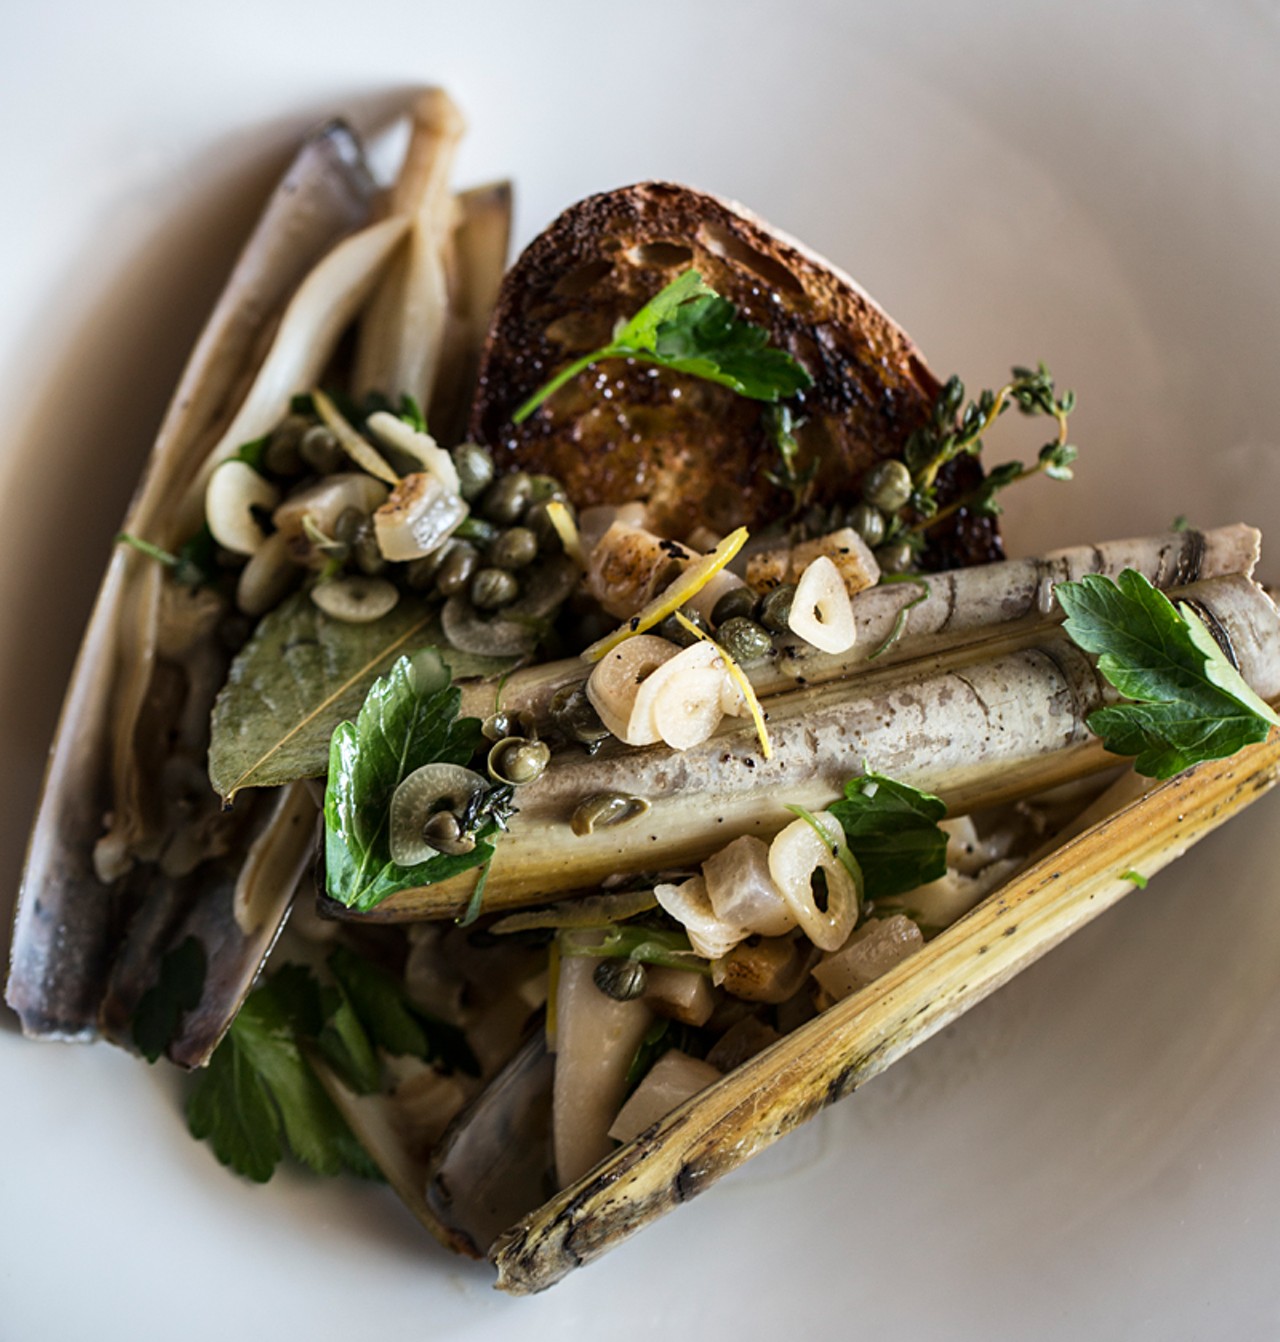 The "Razor Clams al Vino," with capers, garlic, bay leaf and thyme. It's served with housemade sourdough.